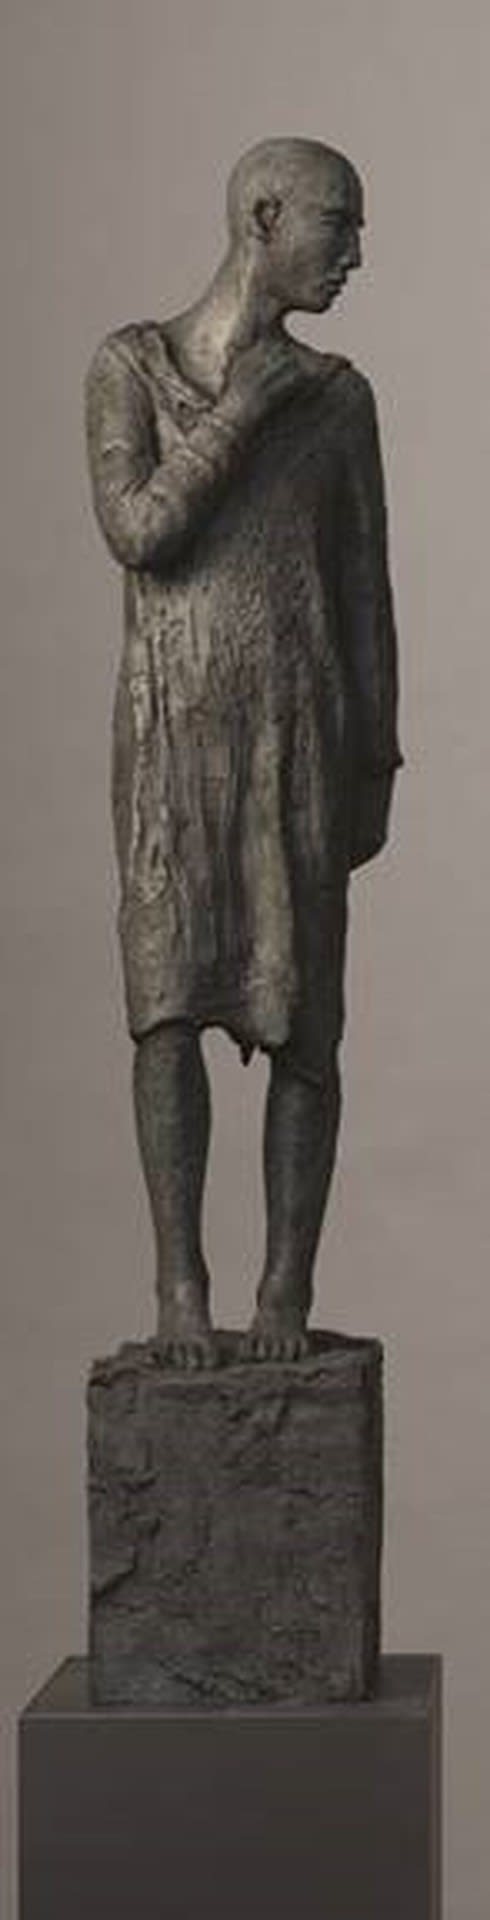 A bronze, androgynous statue looking to its left.